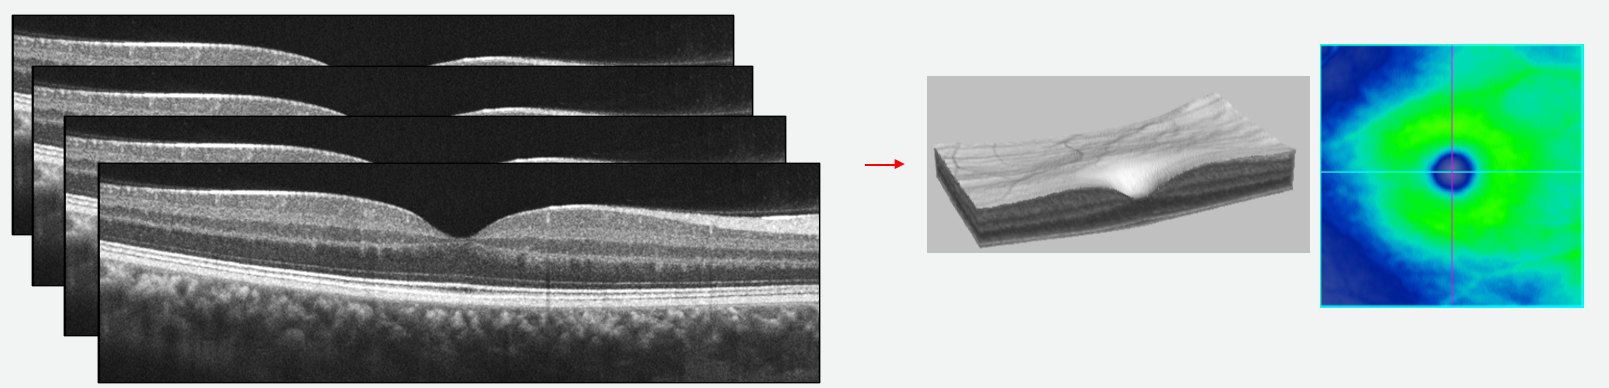 A cube scan is made up of many adjacent B-scans to create a 3D representation of the retina